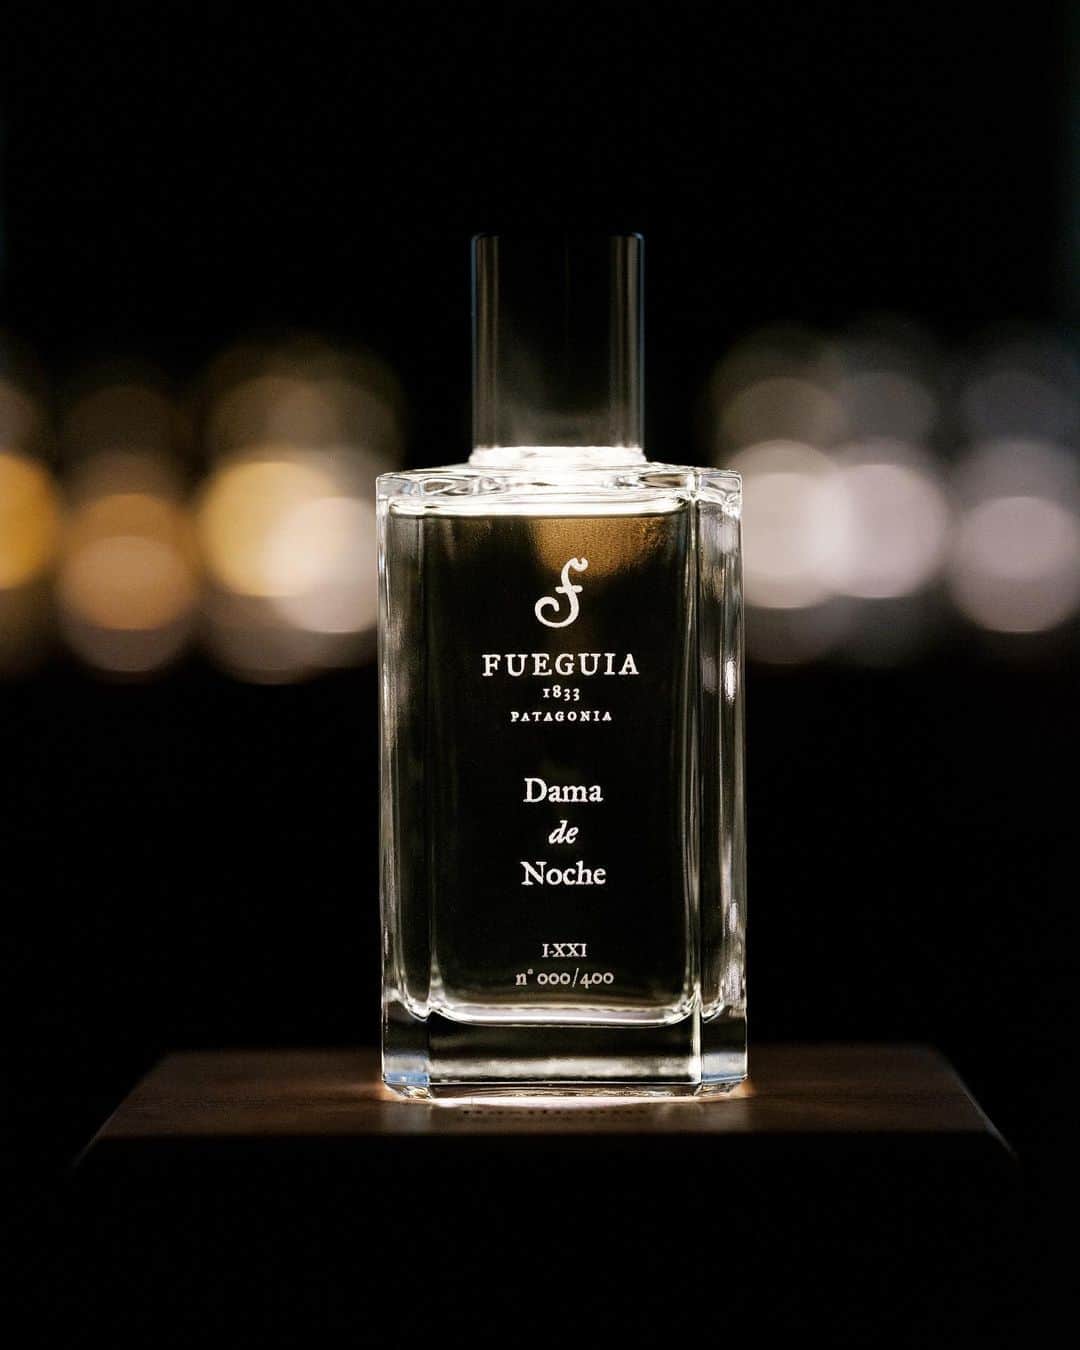 Fueguia 1833のインスタグラム：「Introducing a bespoke creation conceived by @julianbedel for the new Fueguia Gallery at Ginza Six, Tokyo: Dama de Noche.  The main note is derived from a night-blooming jasmine, called Dama de Noche, a beautiful flower that only blooms one night in its lifetime. A memory of Ginza nights.  Exclusively sold at @ginzasix_official from September 16.  ジュリアンベデル@Julian Bedelの仕立てによるクリエーションでDama de Nocheが銀座ギャラリーにて発売されます。 メインノートは夜のみに咲く月下美人の花は美しいジャスミンのように香ります。その花が咲くことが出来るのは生涯一度のみ。 銀座の夜の記憶。  #fueguia1833 #fueguia #julianbedel #ginzasix」